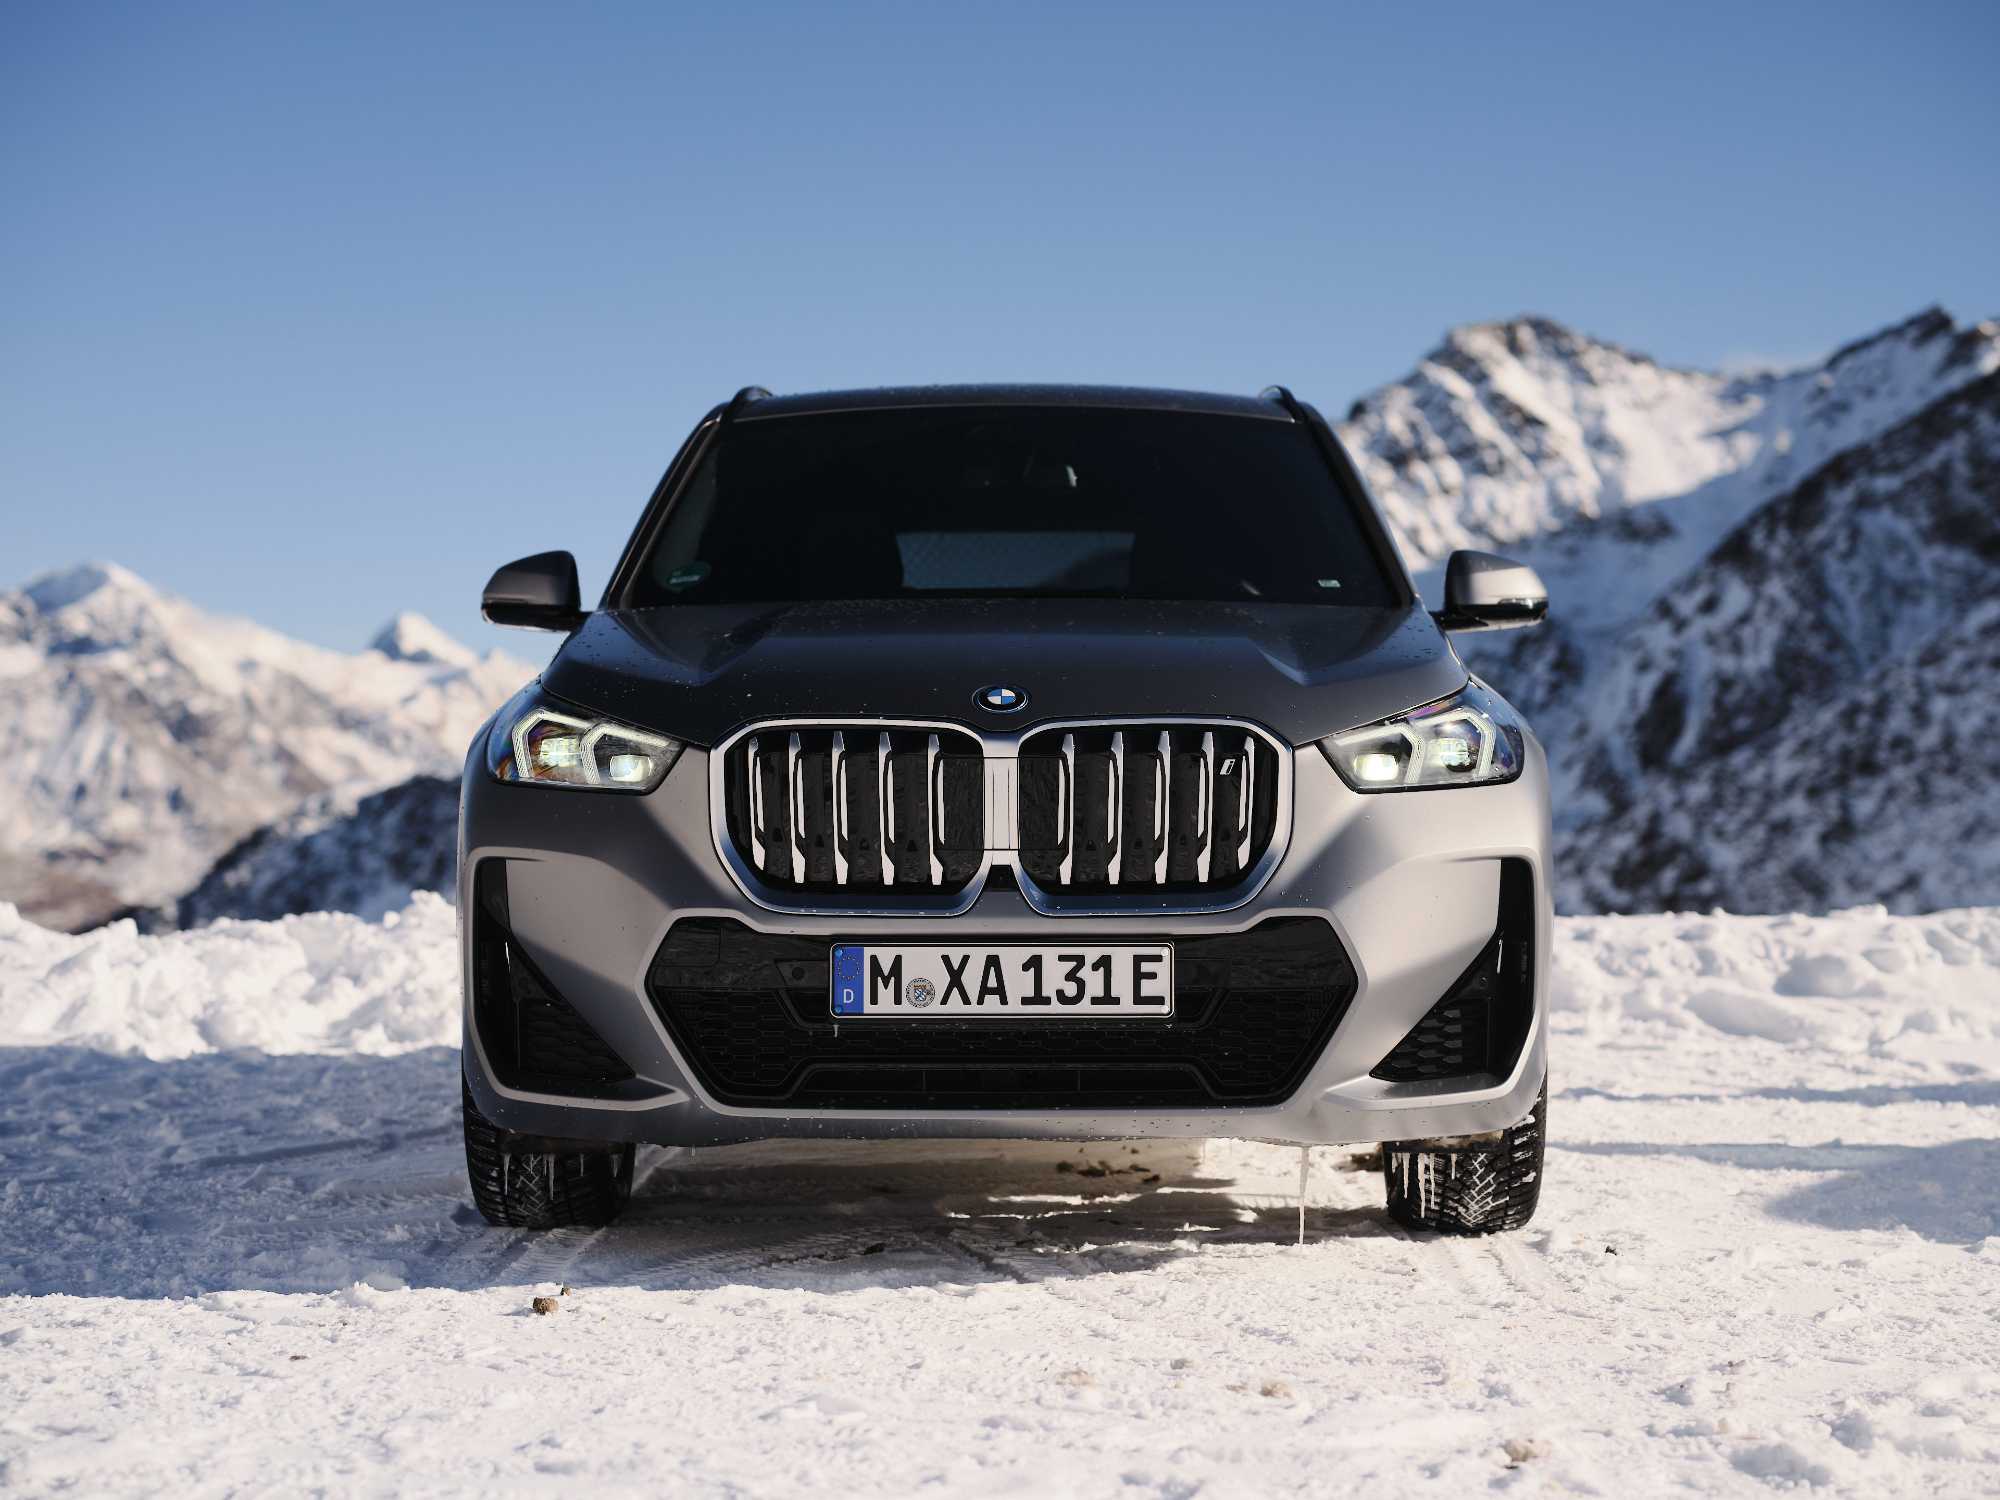 Xceed: The all-new BMW X1 sDrive18i M Sport launched in India.